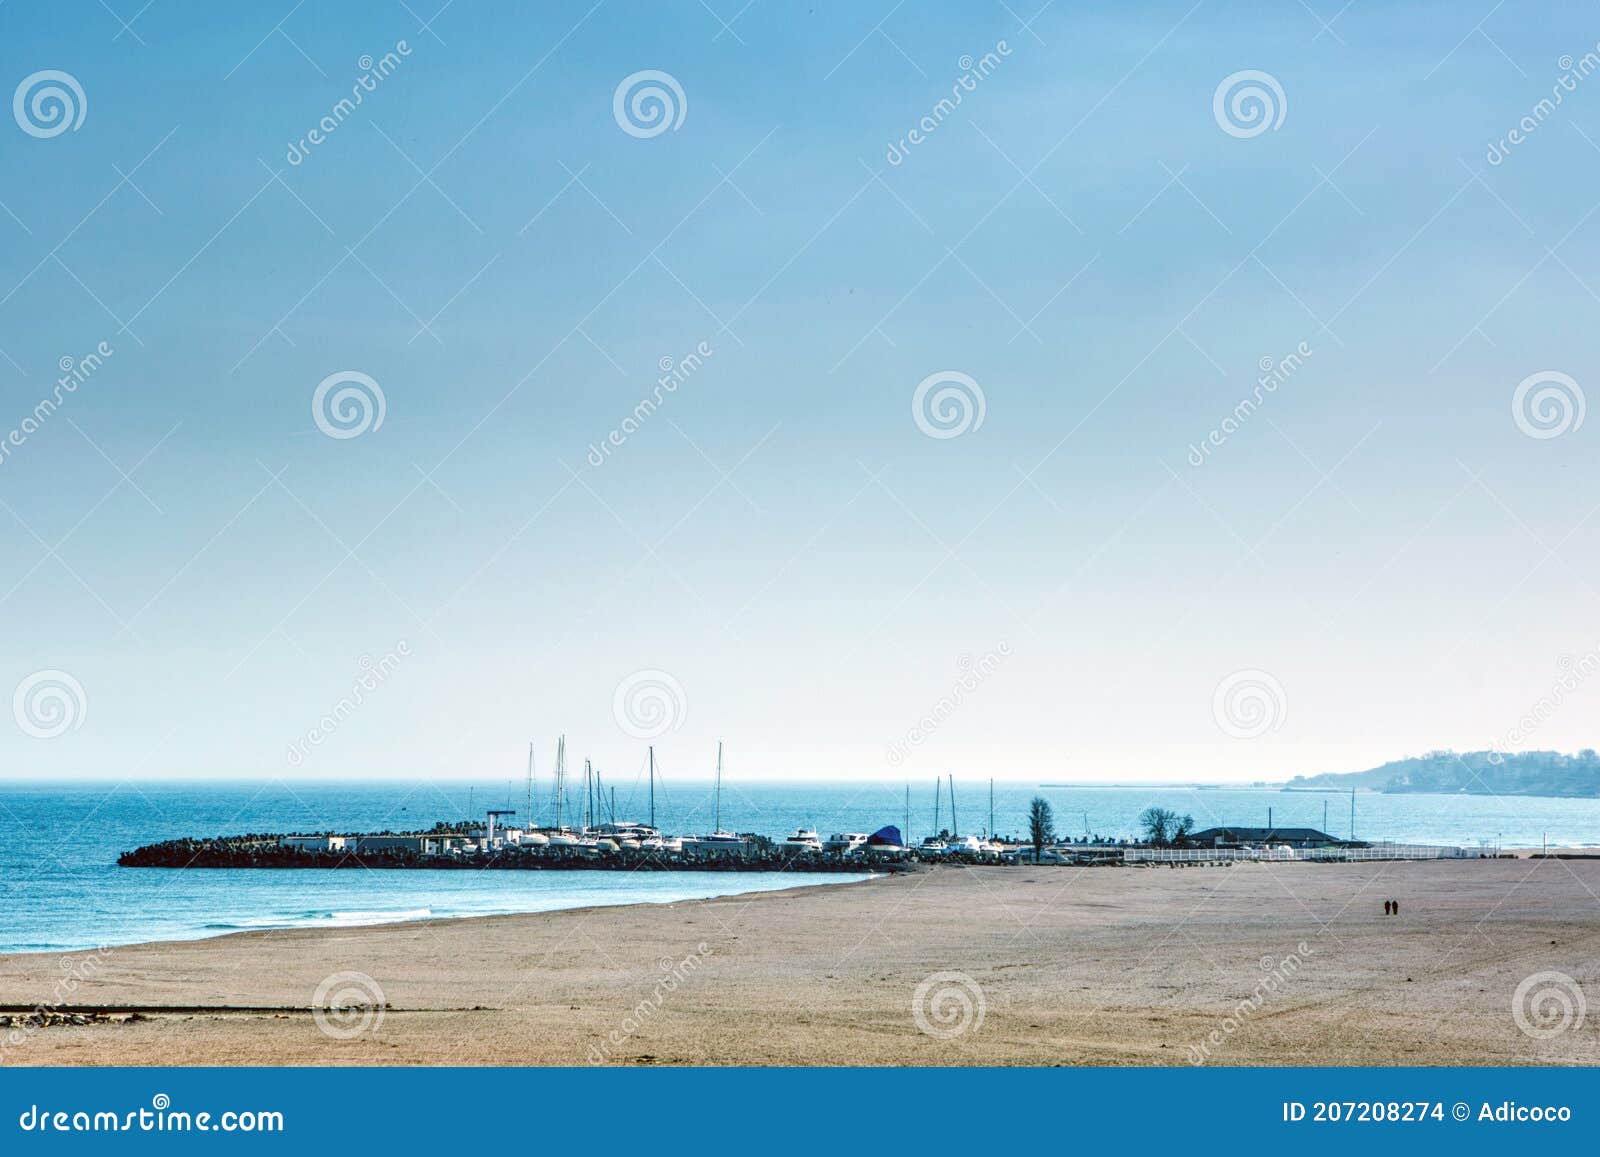 romania - black sea and beach from eforie nord